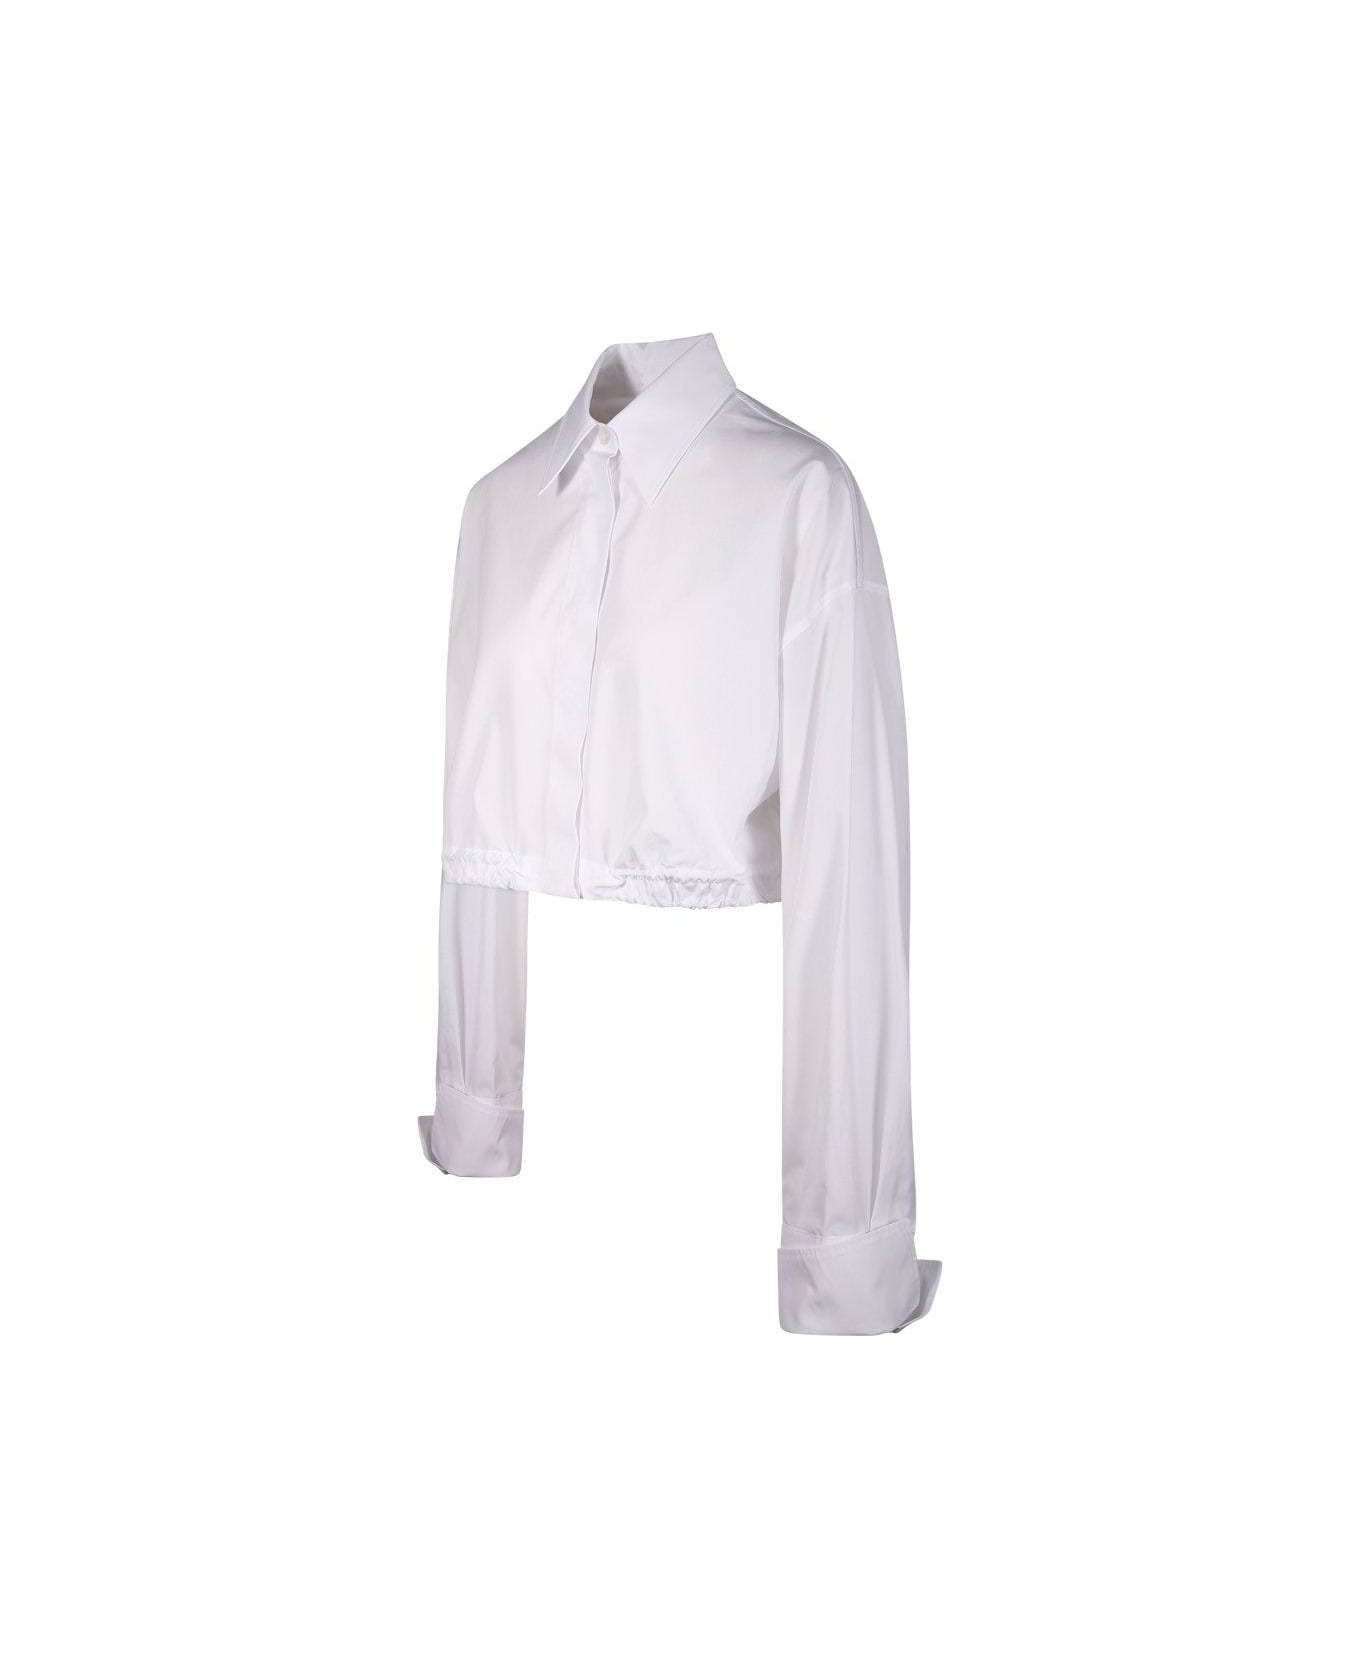 SportMax Buttoned Long-sleeved Cropped Shirt - Bianco ottico シャツ